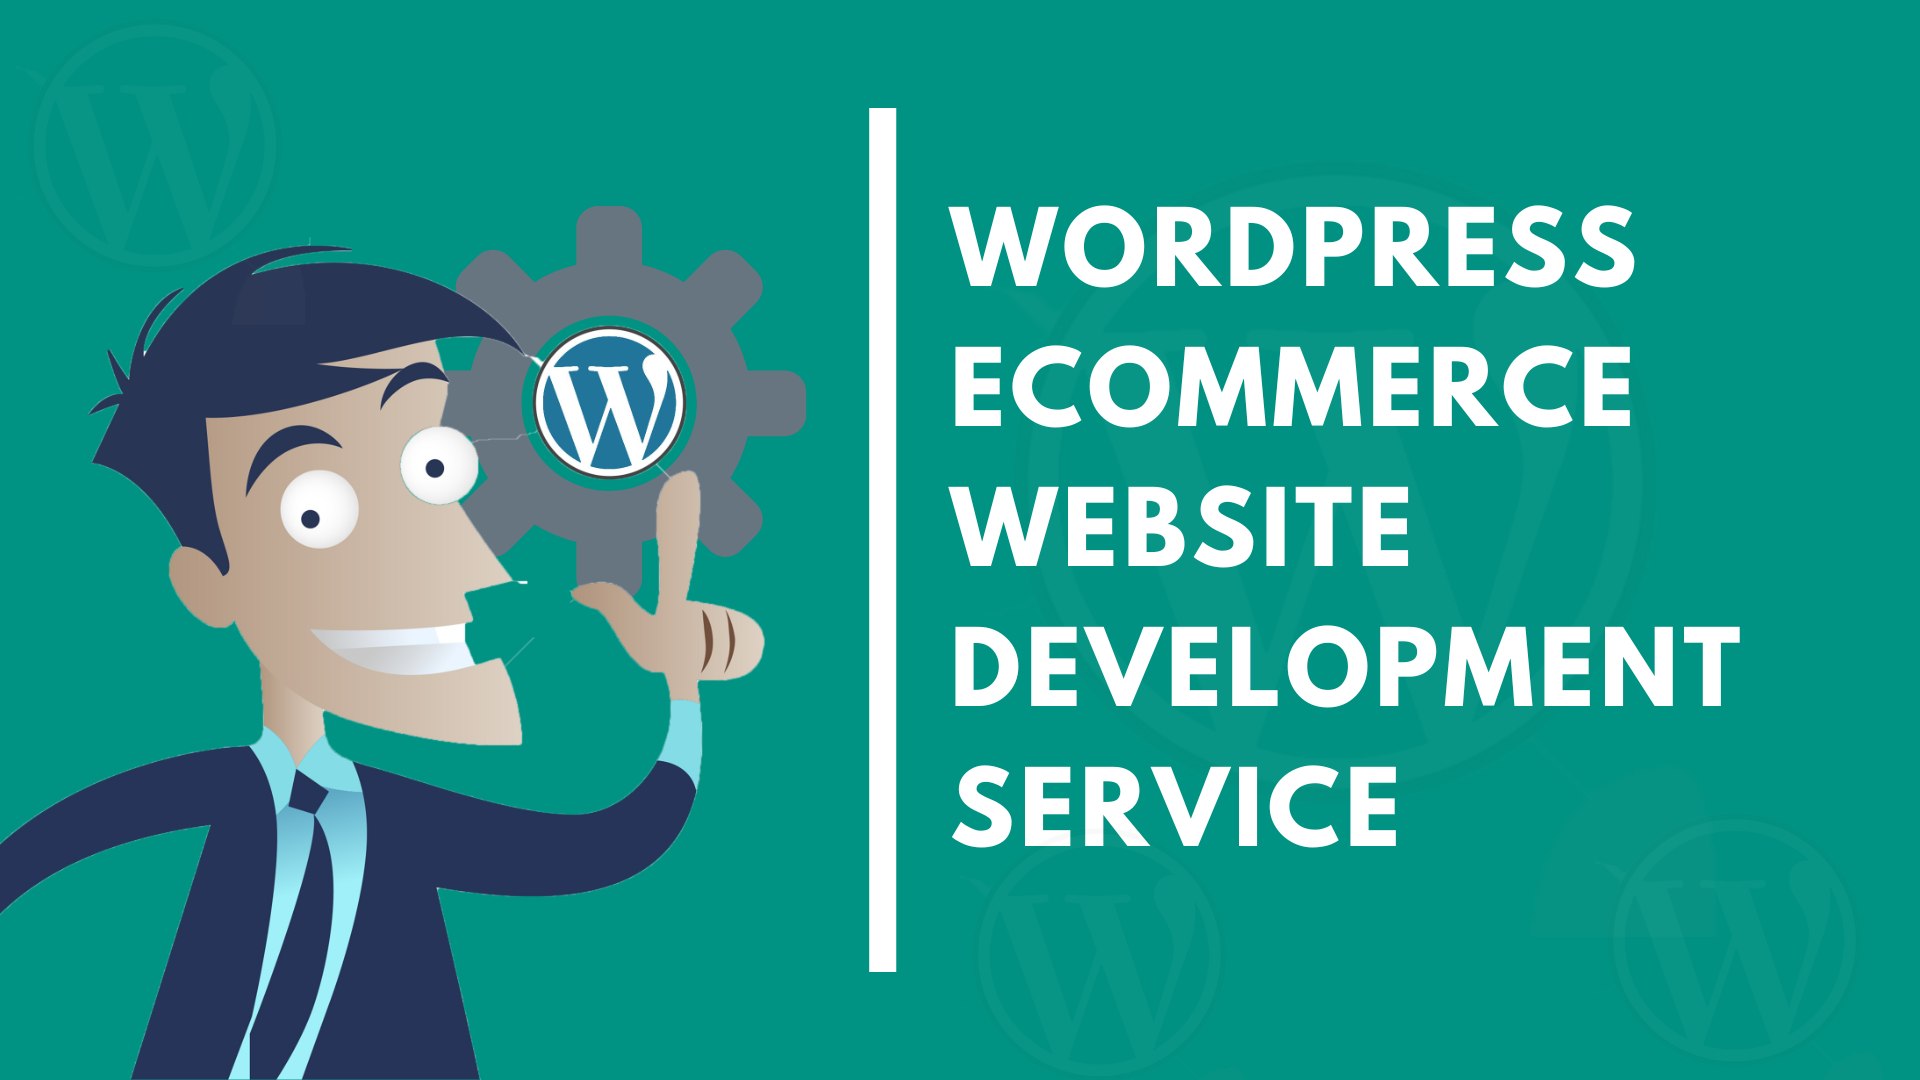 Are you looking for WordPress eCommerce Website Development Service?